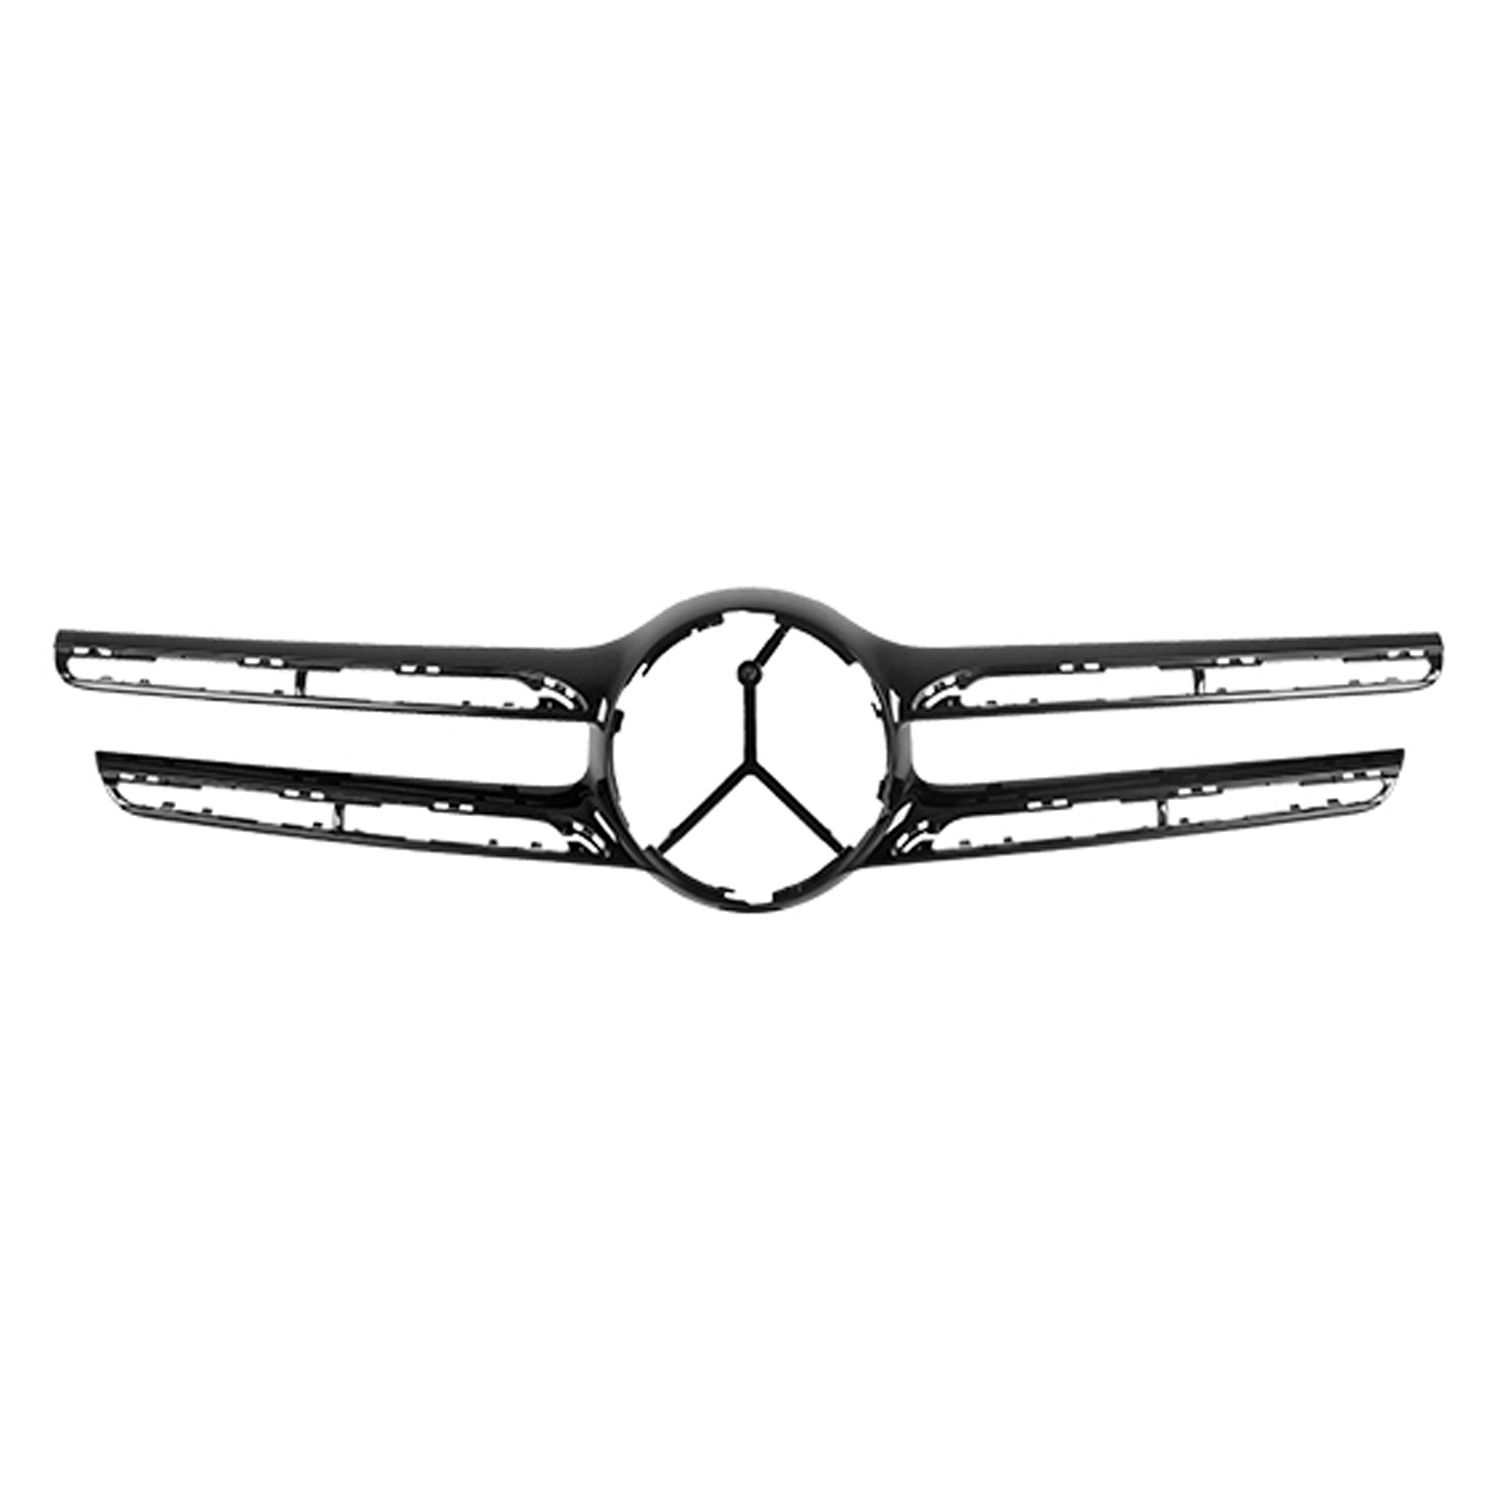 Aftermarket MOLDINGS for MERCEDES-BENZ - GLC300, GLC300,16-19,Grille molding